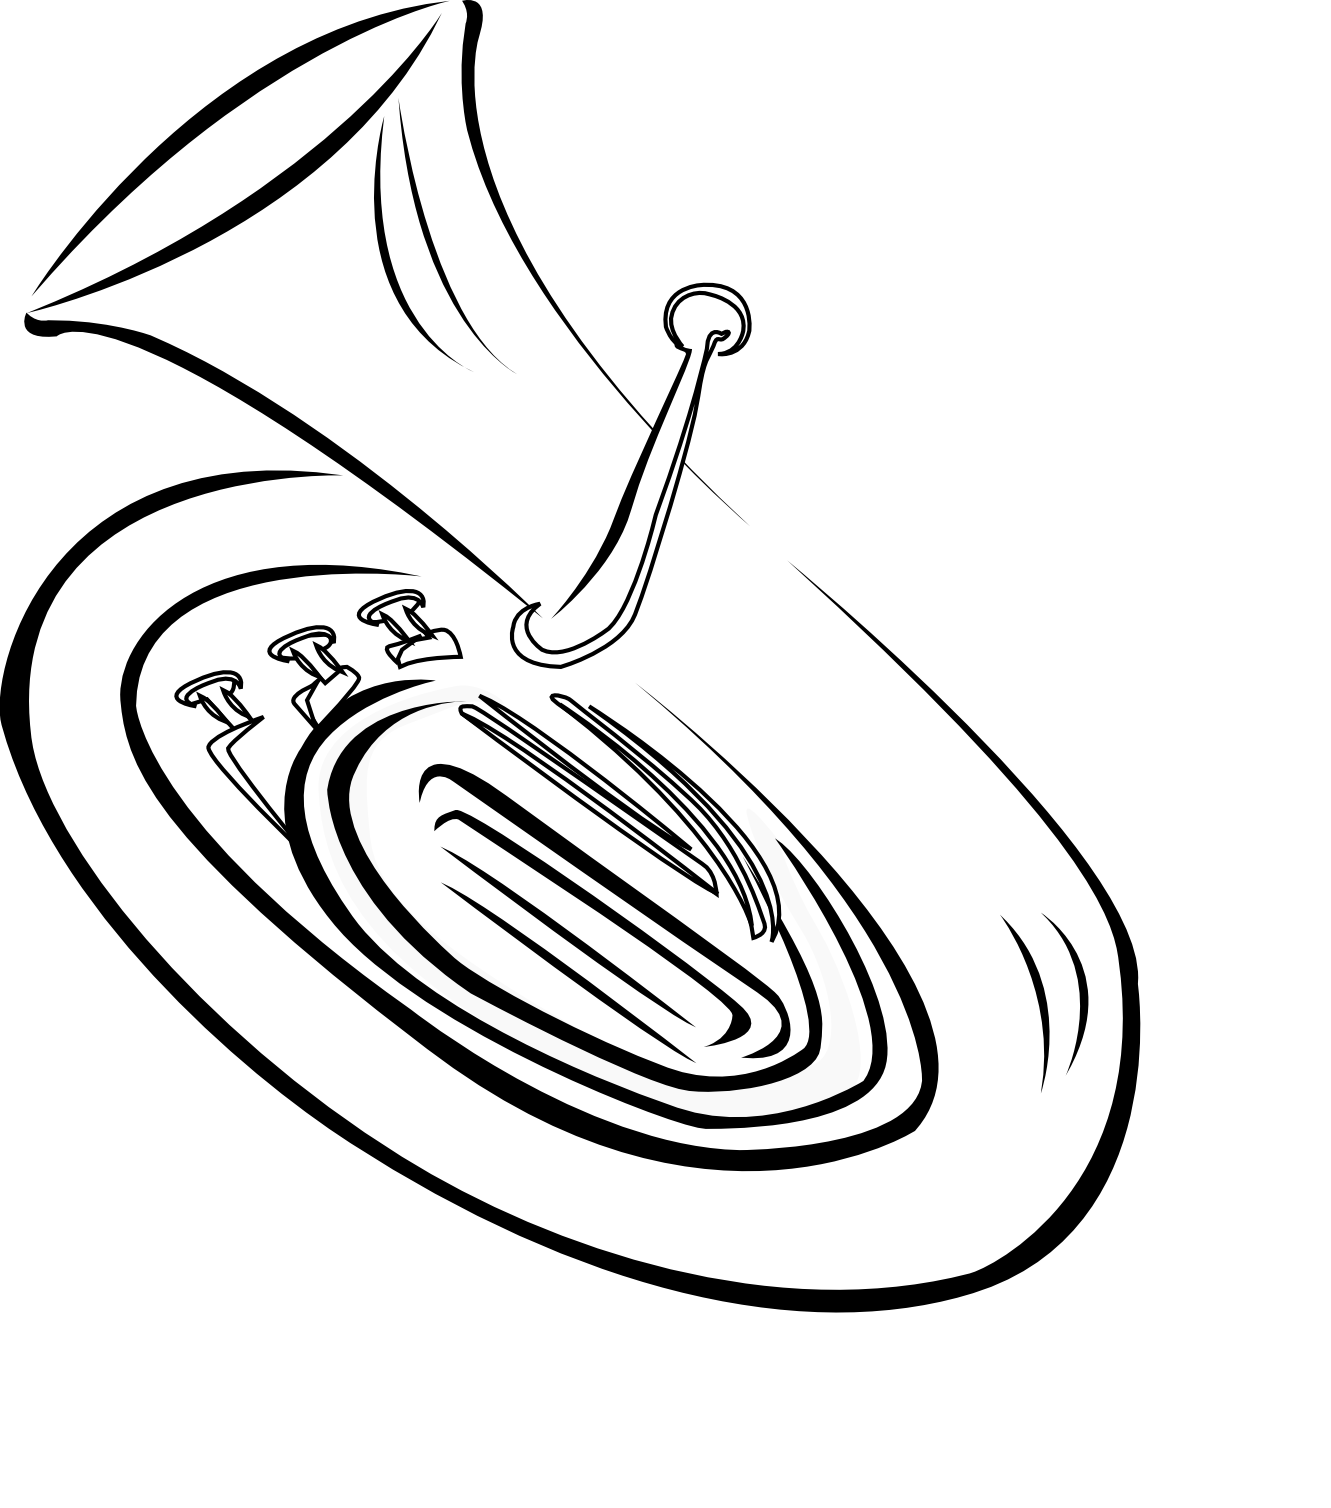 Clip Arts Related To : sousaphone clipart. 